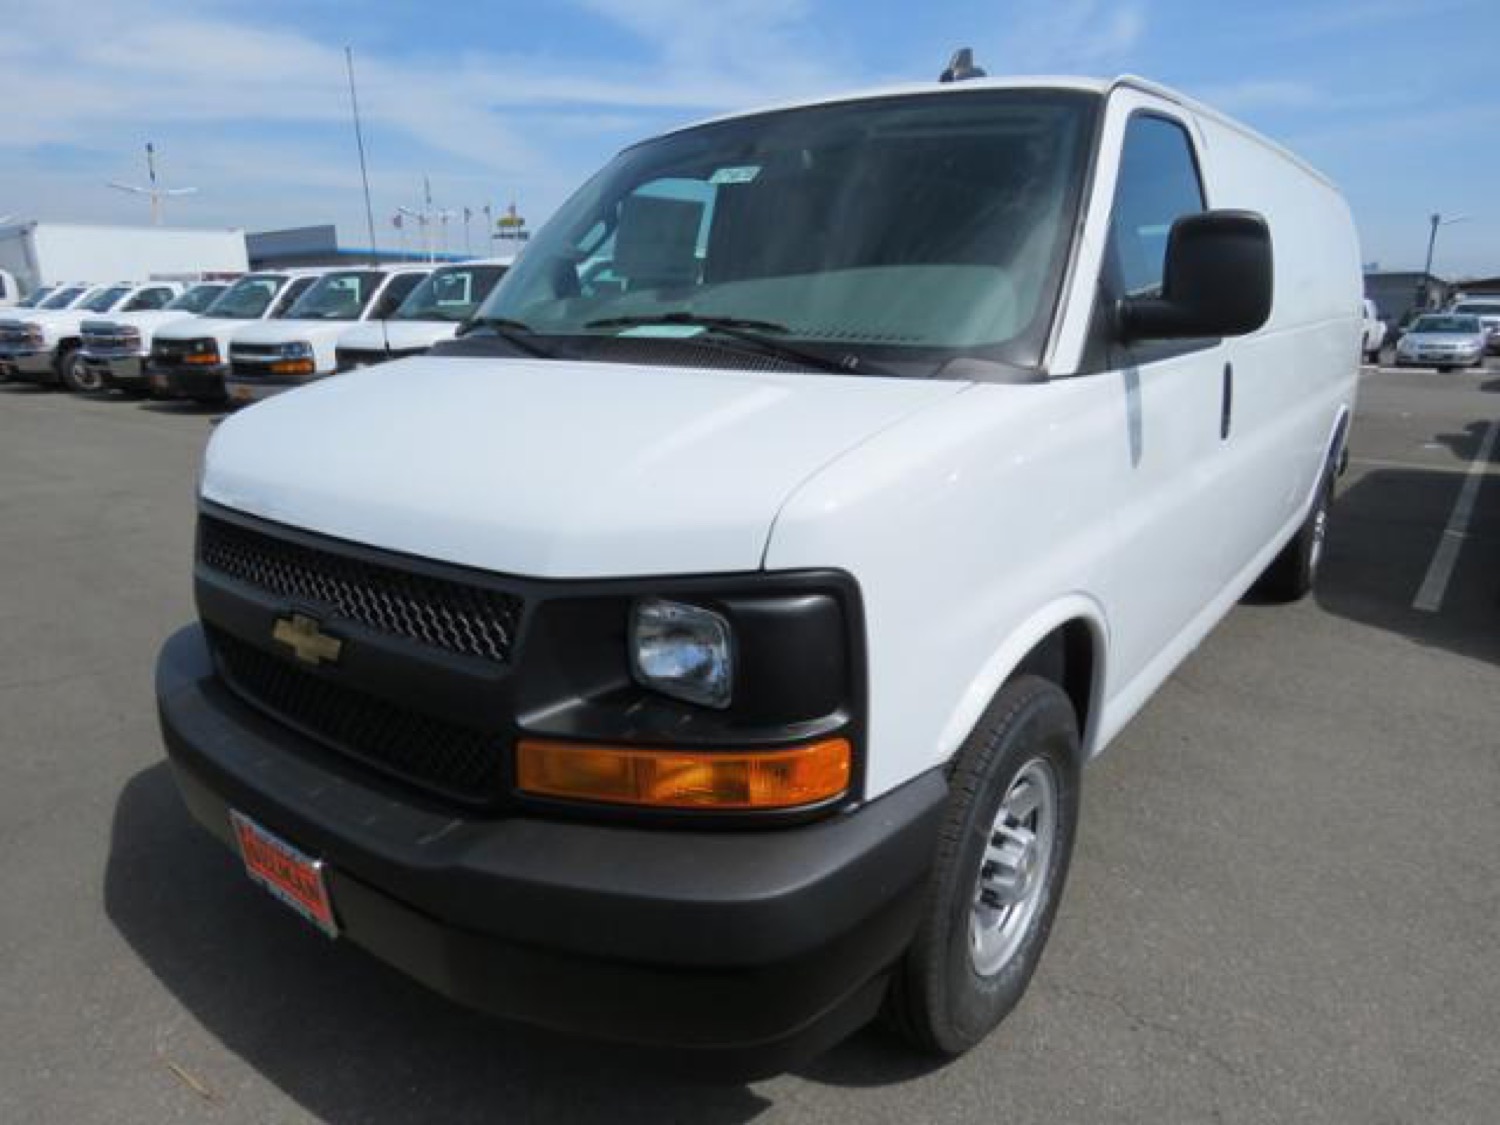 New 2017 Chevrolet Express Cargo Van Available At LA Dealer | GM Authority